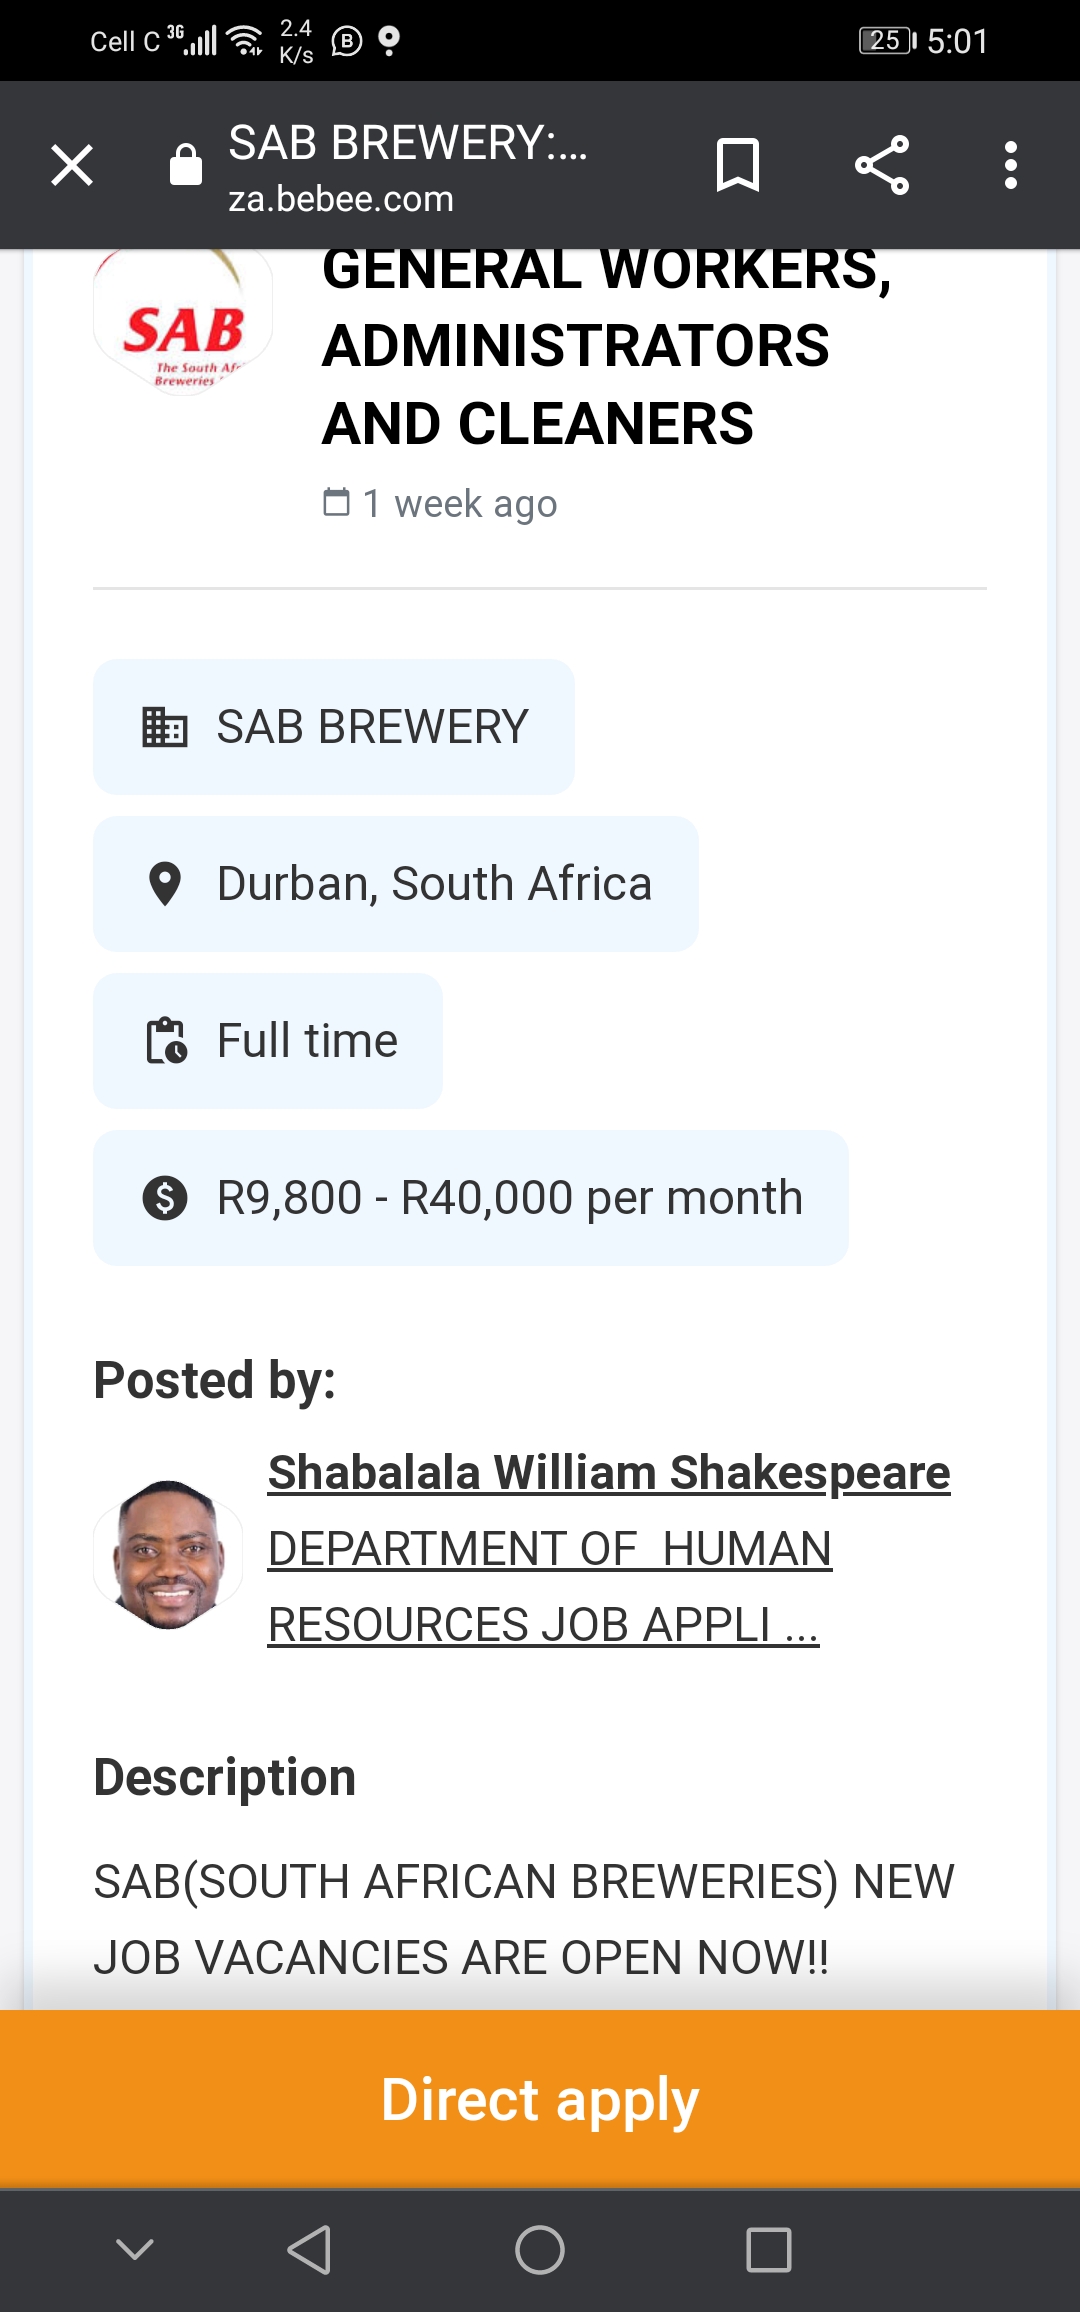 celica ® i: ® © [PEYE)

4 SAB BREWERY...

za.bebee.com

 

SAB ADMINISTRATORS
AND CLEANERS

8 1 week ago

fa SAB BREWERY
Q@ Durban, South Africa
[o Full time

© R9,800 - R40,000 per month

Posted by:

DEPARTMENT OF HUMAN

Shabalala William Shakespeare
&amp; RESOURCES JOB APPLI ...

Description

SAB(SOUTH AFRICAN BREWERIES) NEW
JOB VACANCIES ARE OPEN NOW!